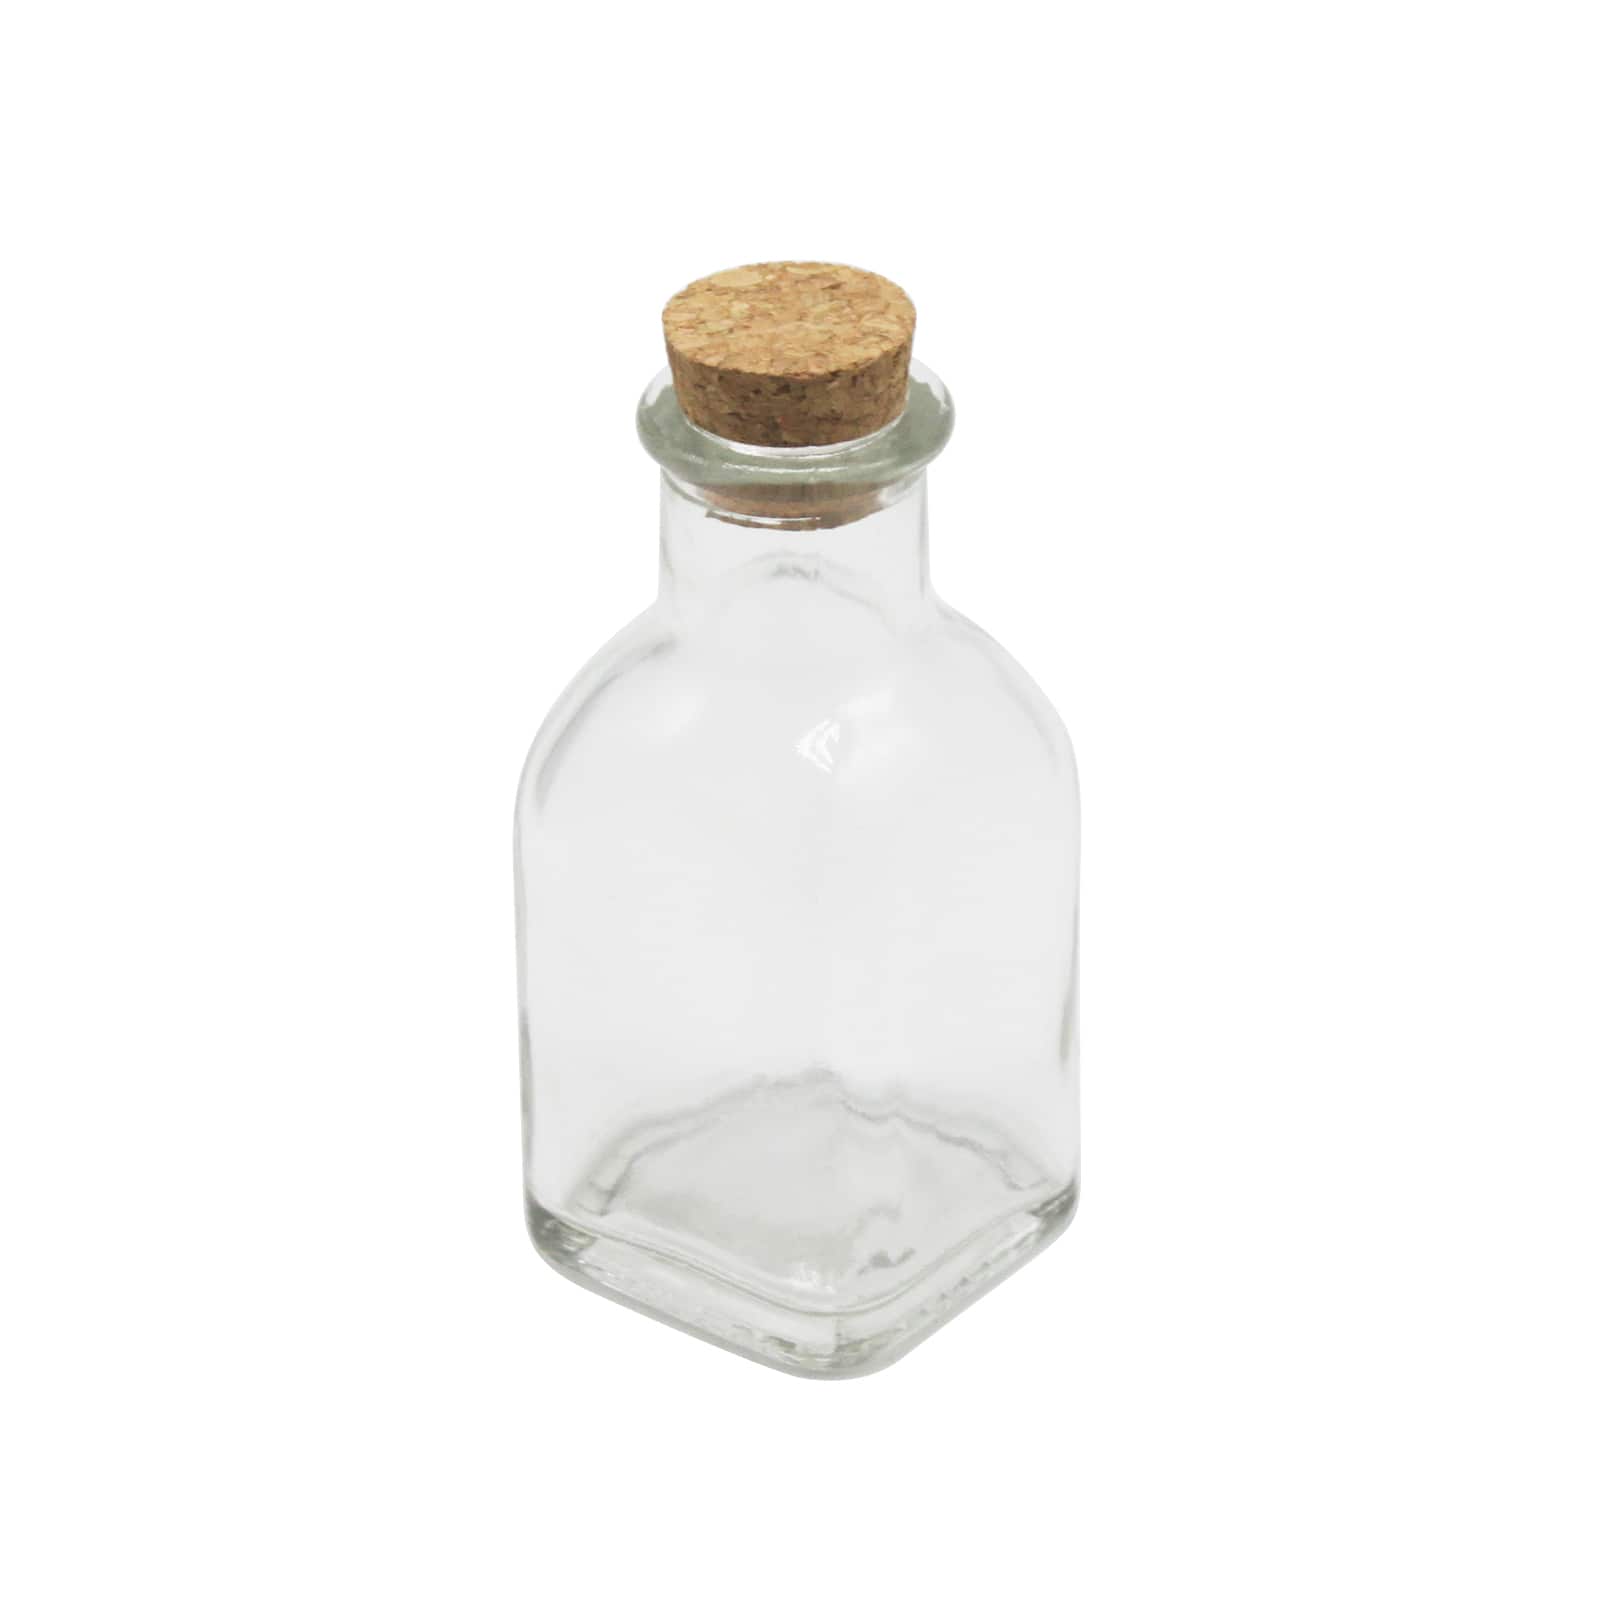 6 Packs: 18 ct. (108 total) Favor Jars with Cork Stoppers by Celebrate It&#xAE;